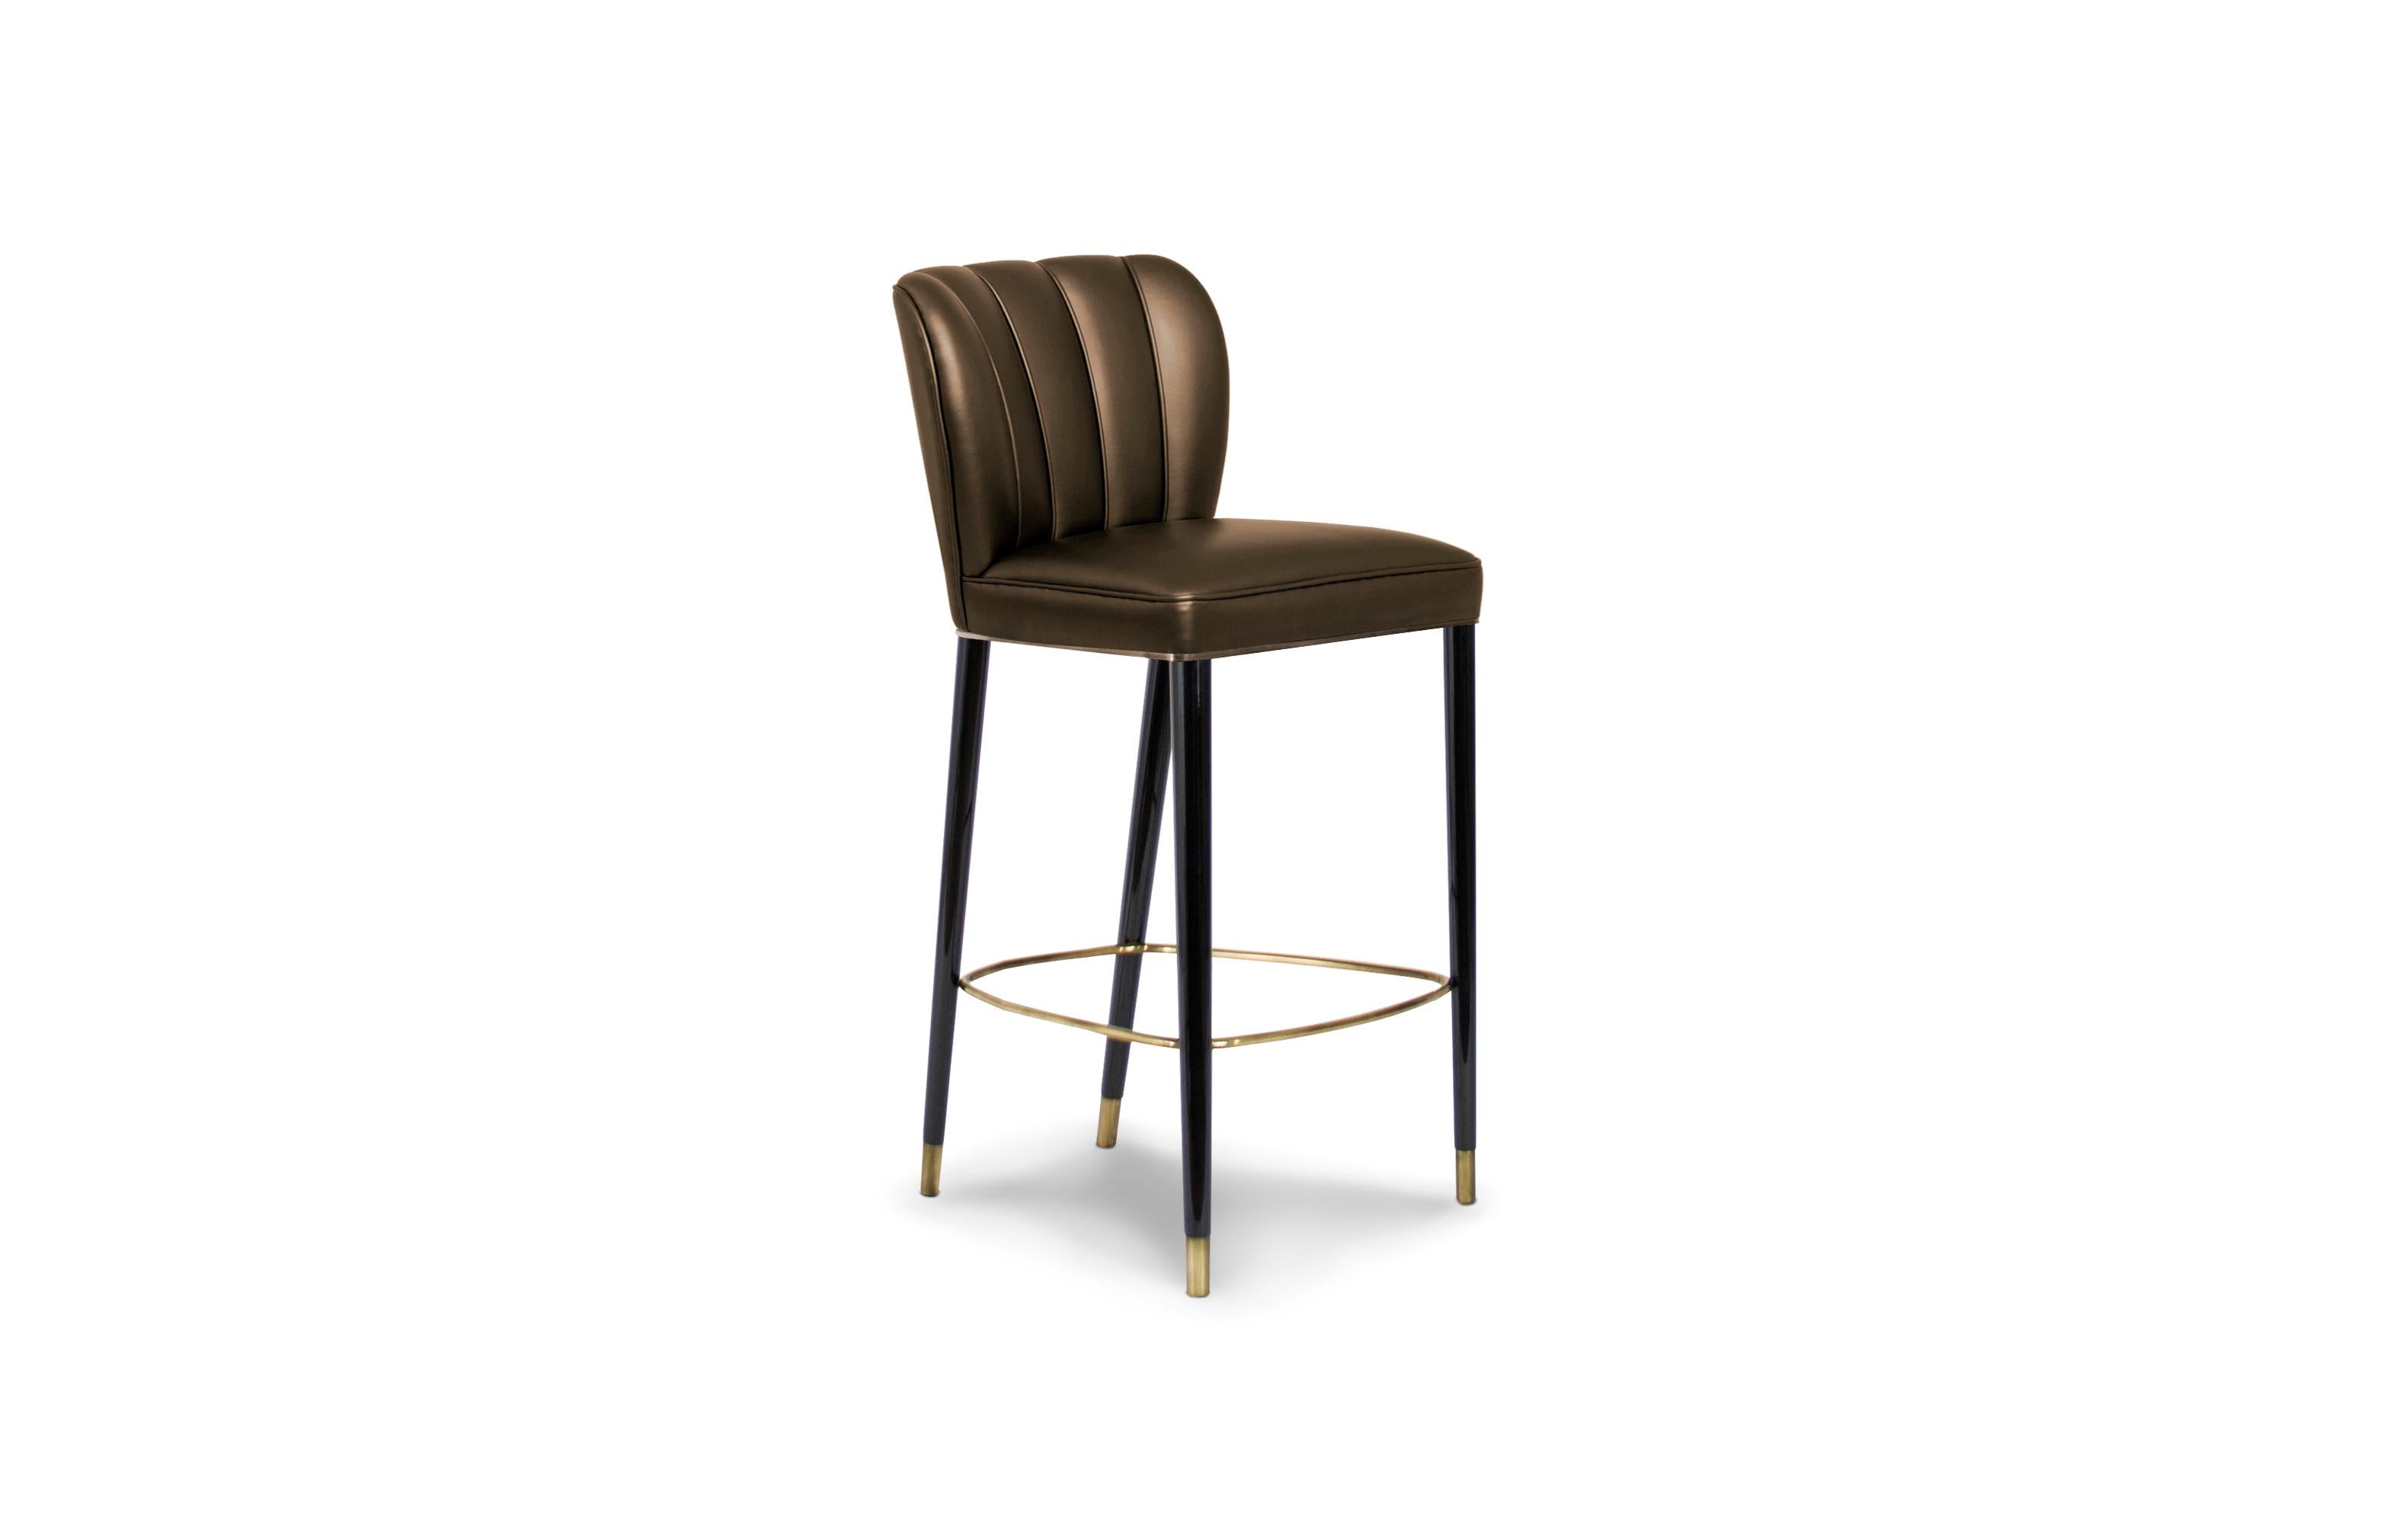 If Cleopatra was alive today, how would it be the furniture of her palace? This question dared our design team to create Dalyan counter stool. With legs in glossy black lacquer with glossy aged brass details, this Faux leather counter height stool